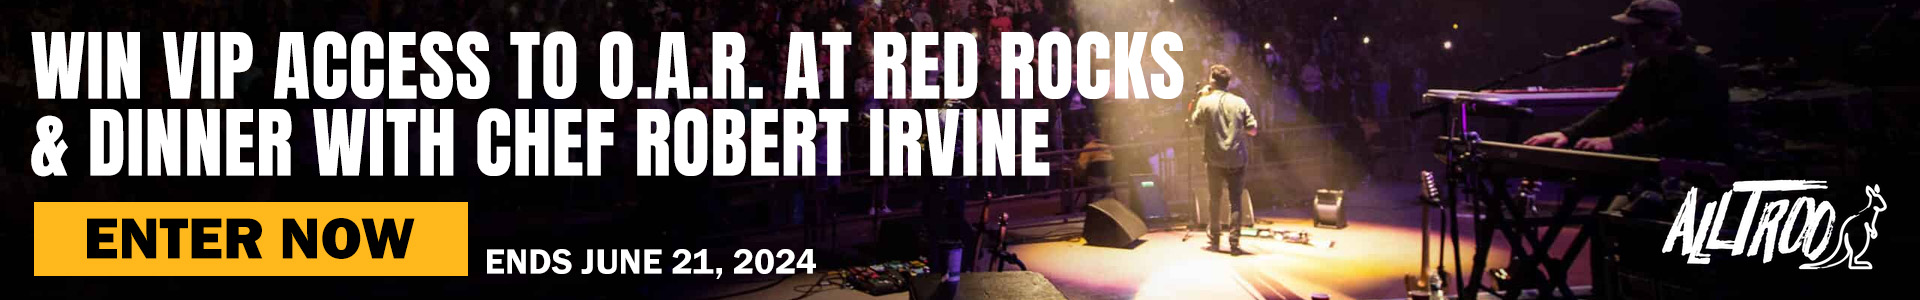 WIN VIP ACCESS TO O.A.R. AT RED ROCKS & DINNER WITH CHEF ROBERT IRVINE!